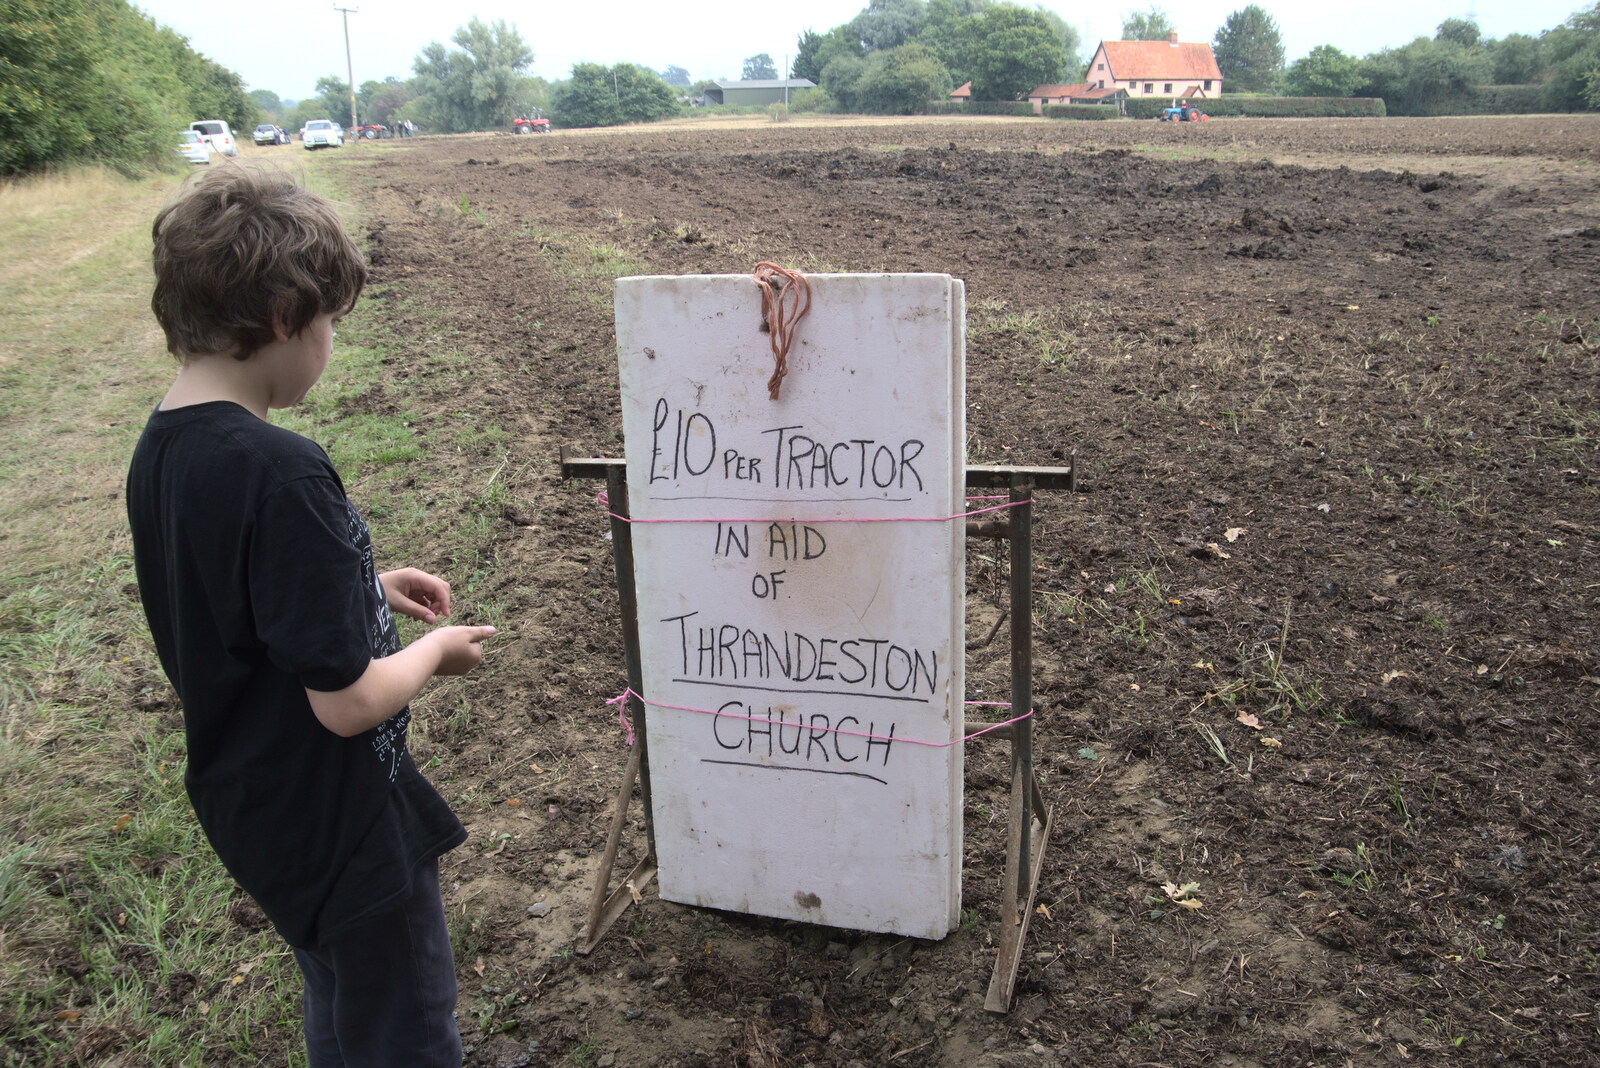 Fred considers the sign from Vintage Tractor Ploughing, Thrandeston, Suffolk - 26th September 2021